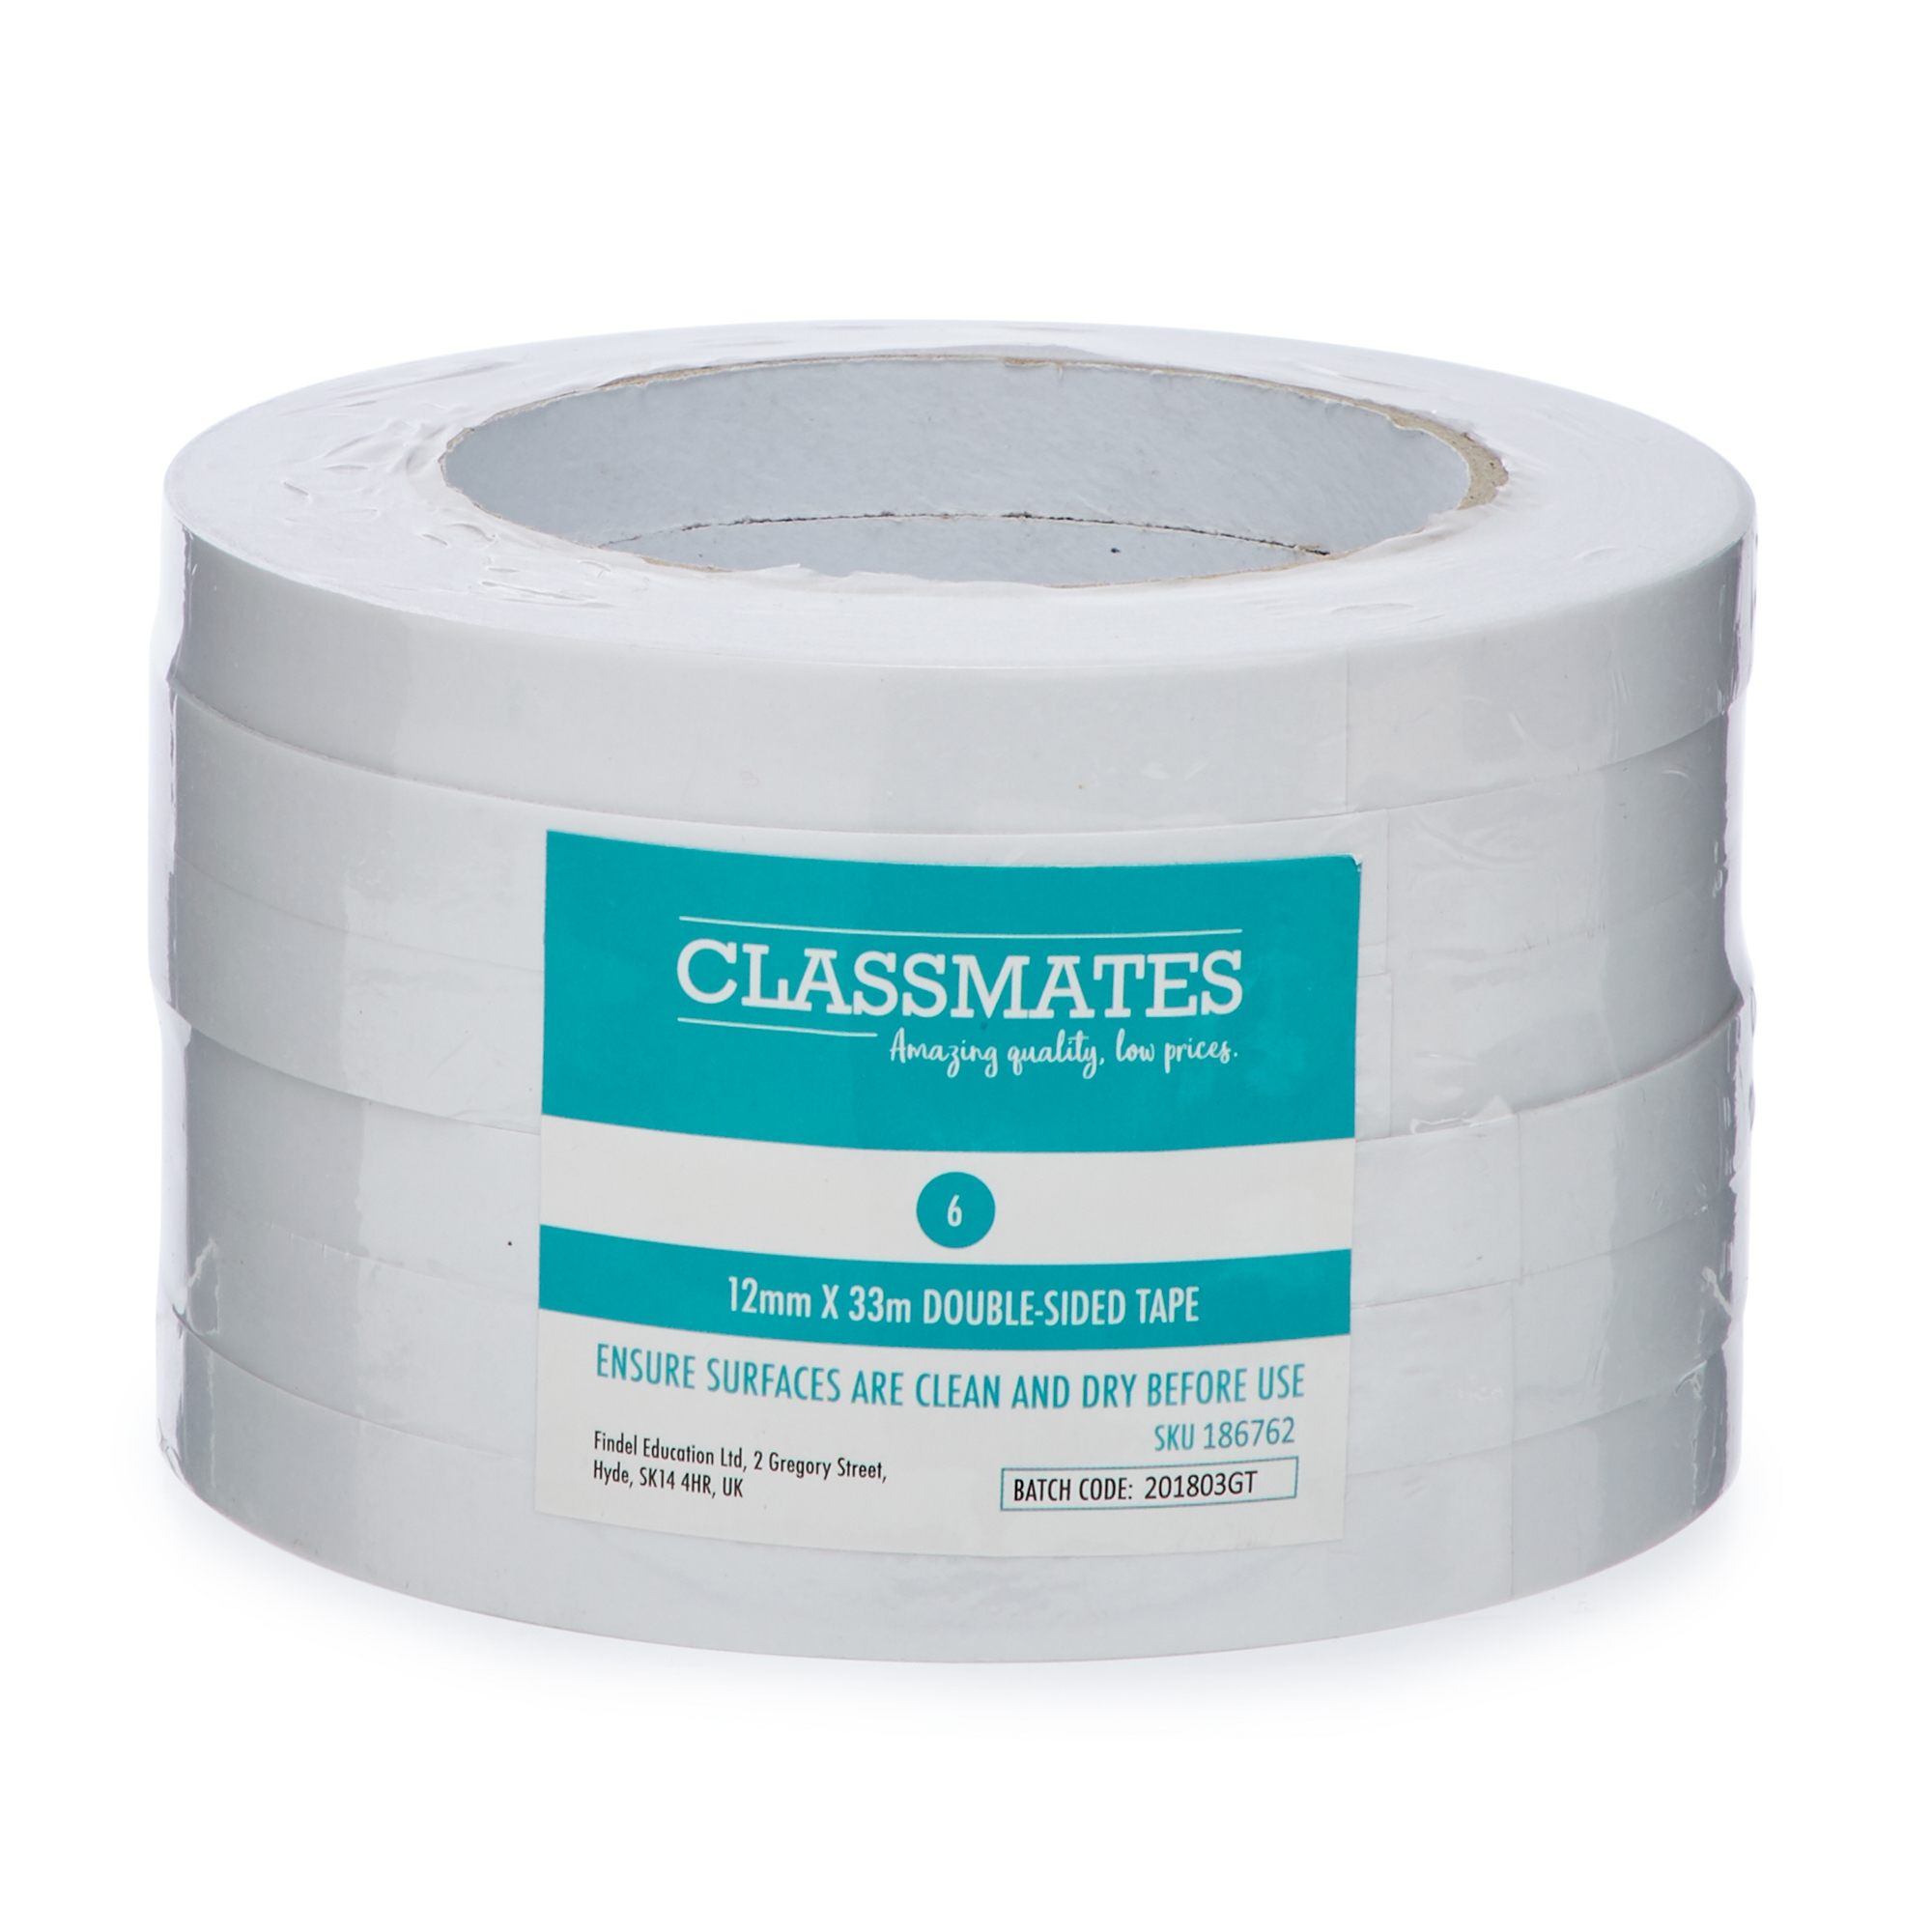 Classmates Double Sided Tape 12mm 33m - Pack of 6